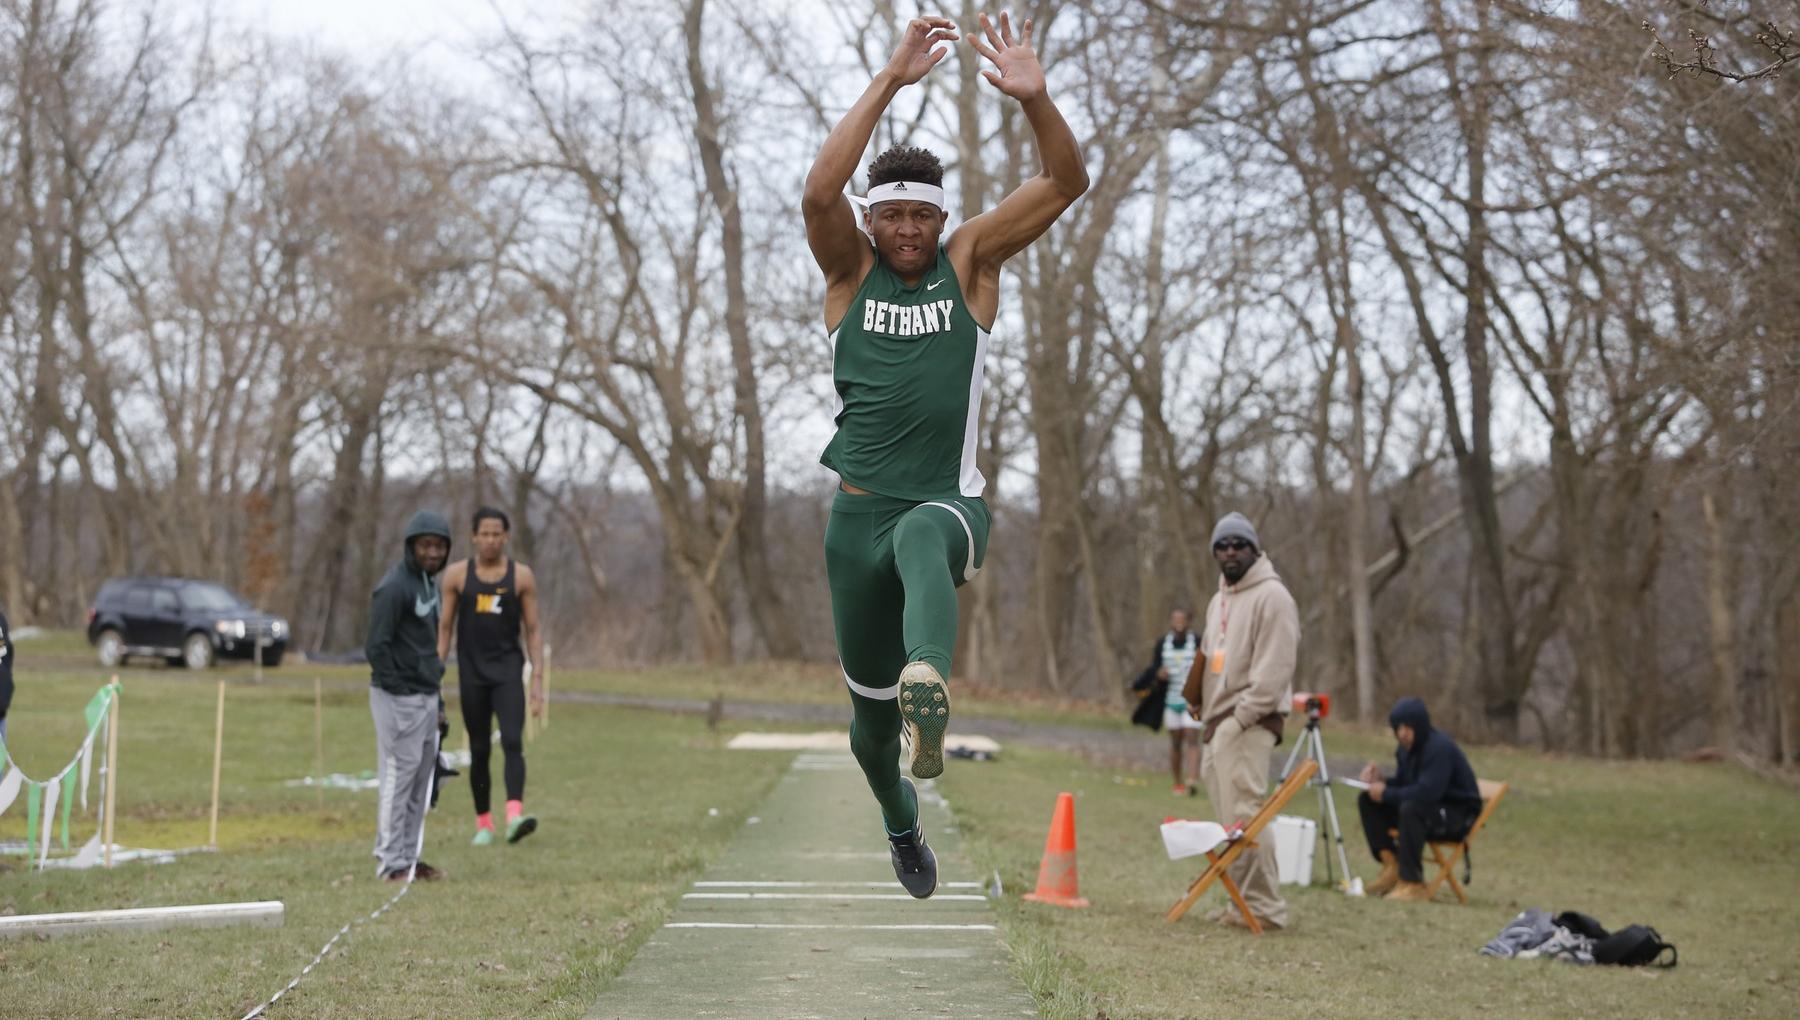 Sallah-Mohammed breaks two school records at ECAC Outdoors